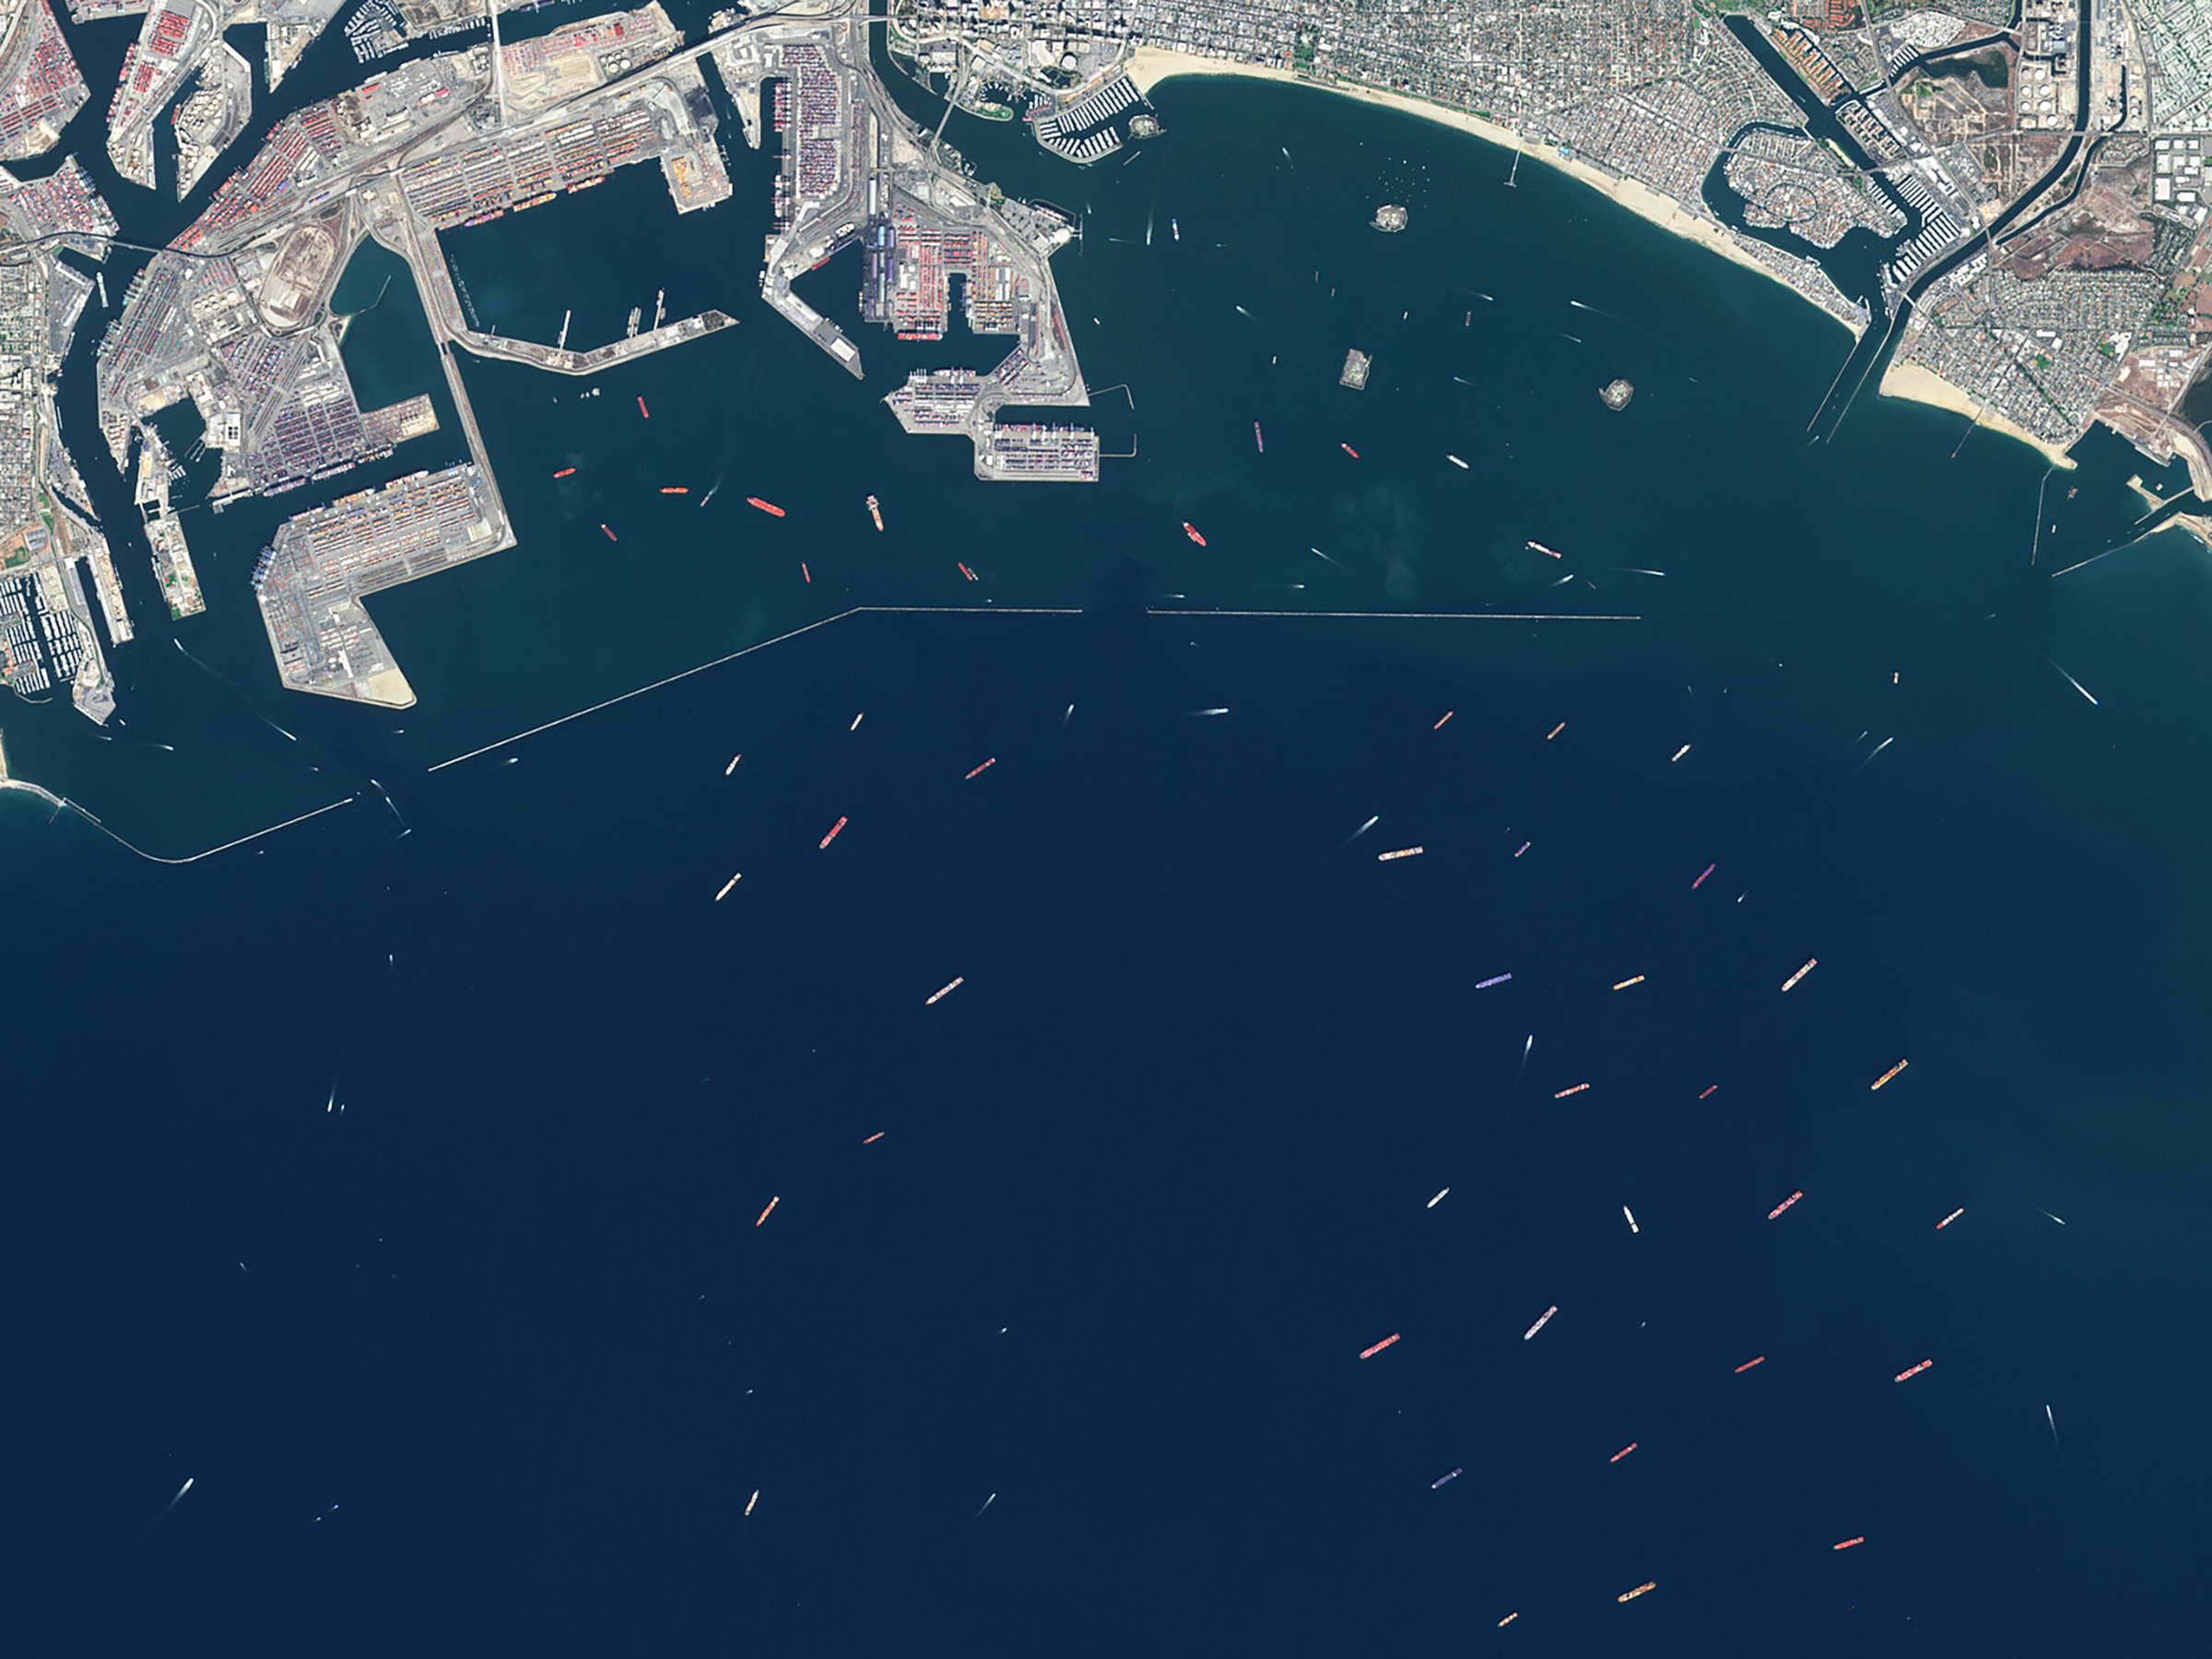 A satellite view of cargo ships waiting to offload at the Ports of Los Angeles on Oct. 10, 2021, during the Covid-19 pandemic. (Gallo Images/Orbital Horizon/Copernicus Sentinel Data/Getty Images)